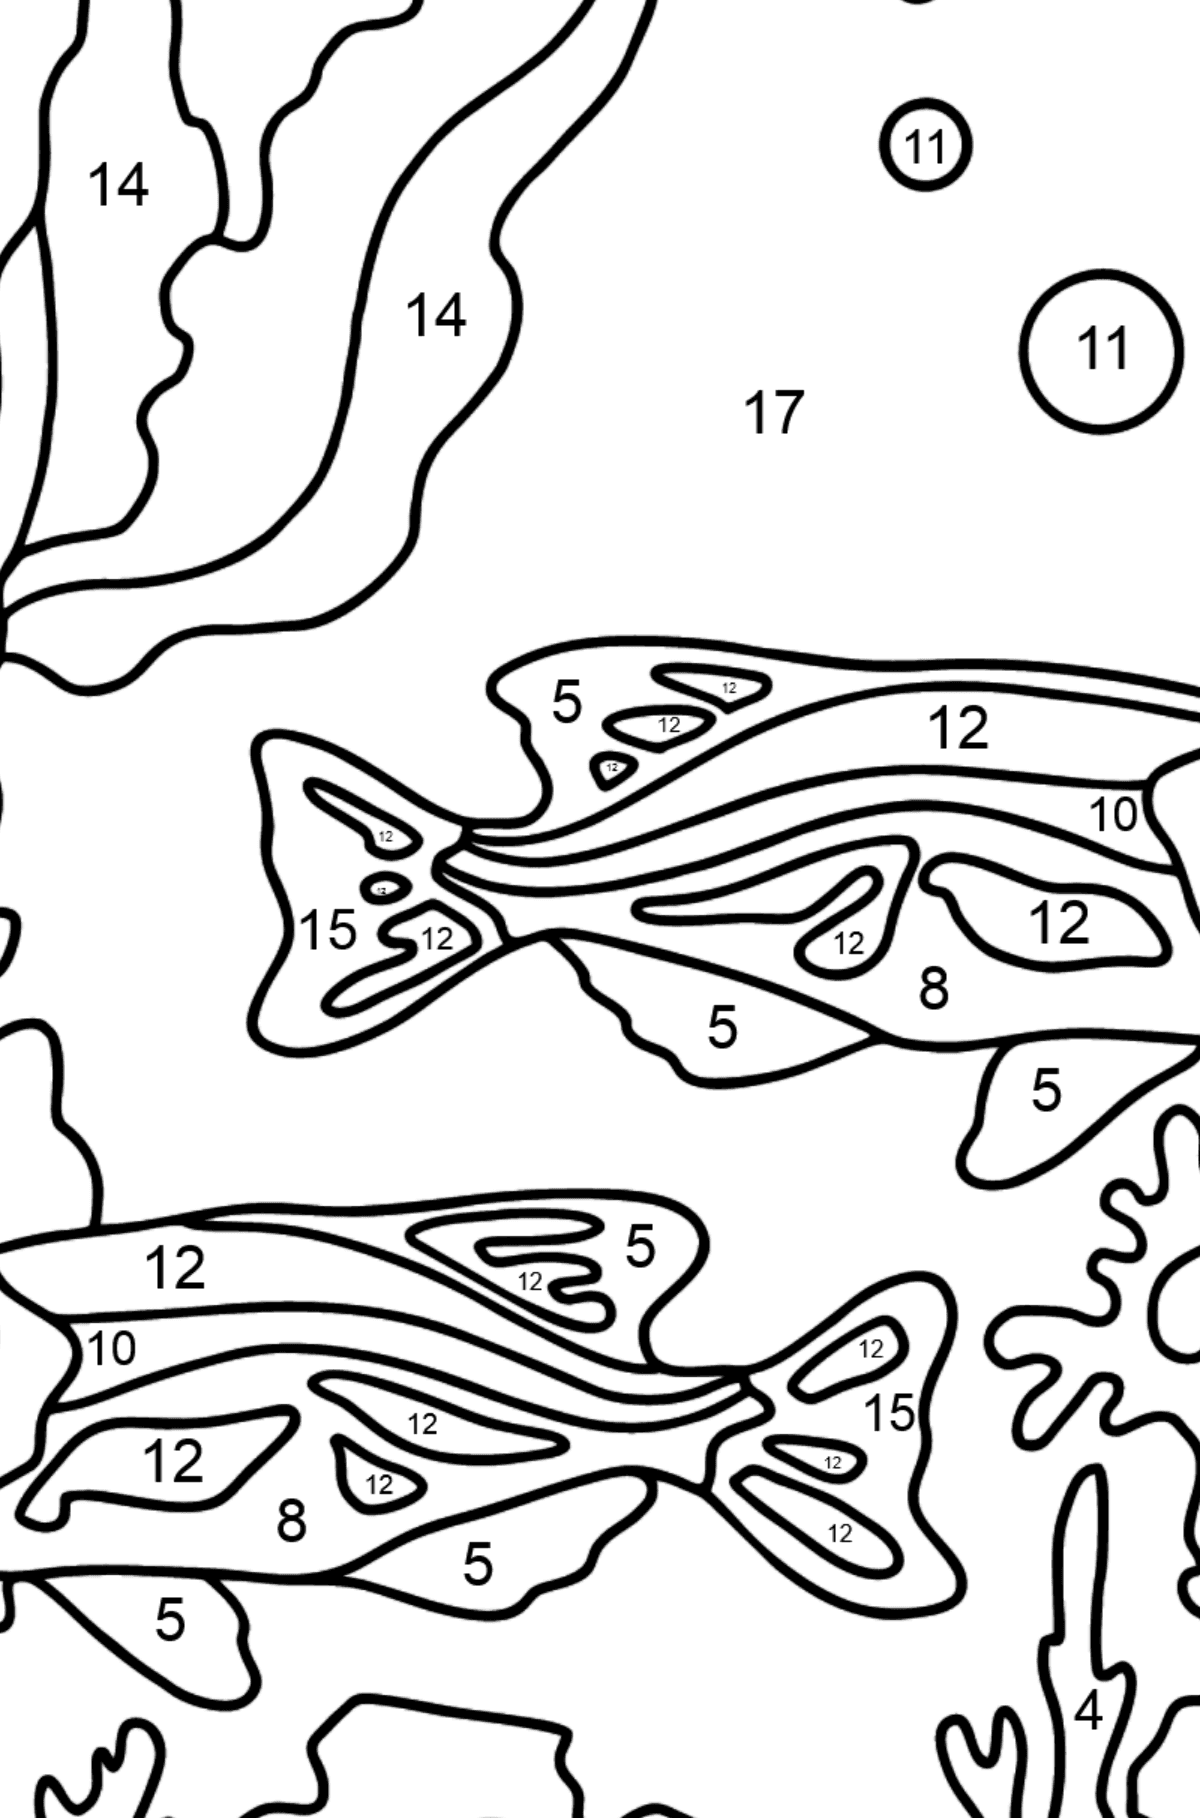 Two Fish Coloring Page - Fish are Swimming Beautifully - Coloring by Numbers for Kids